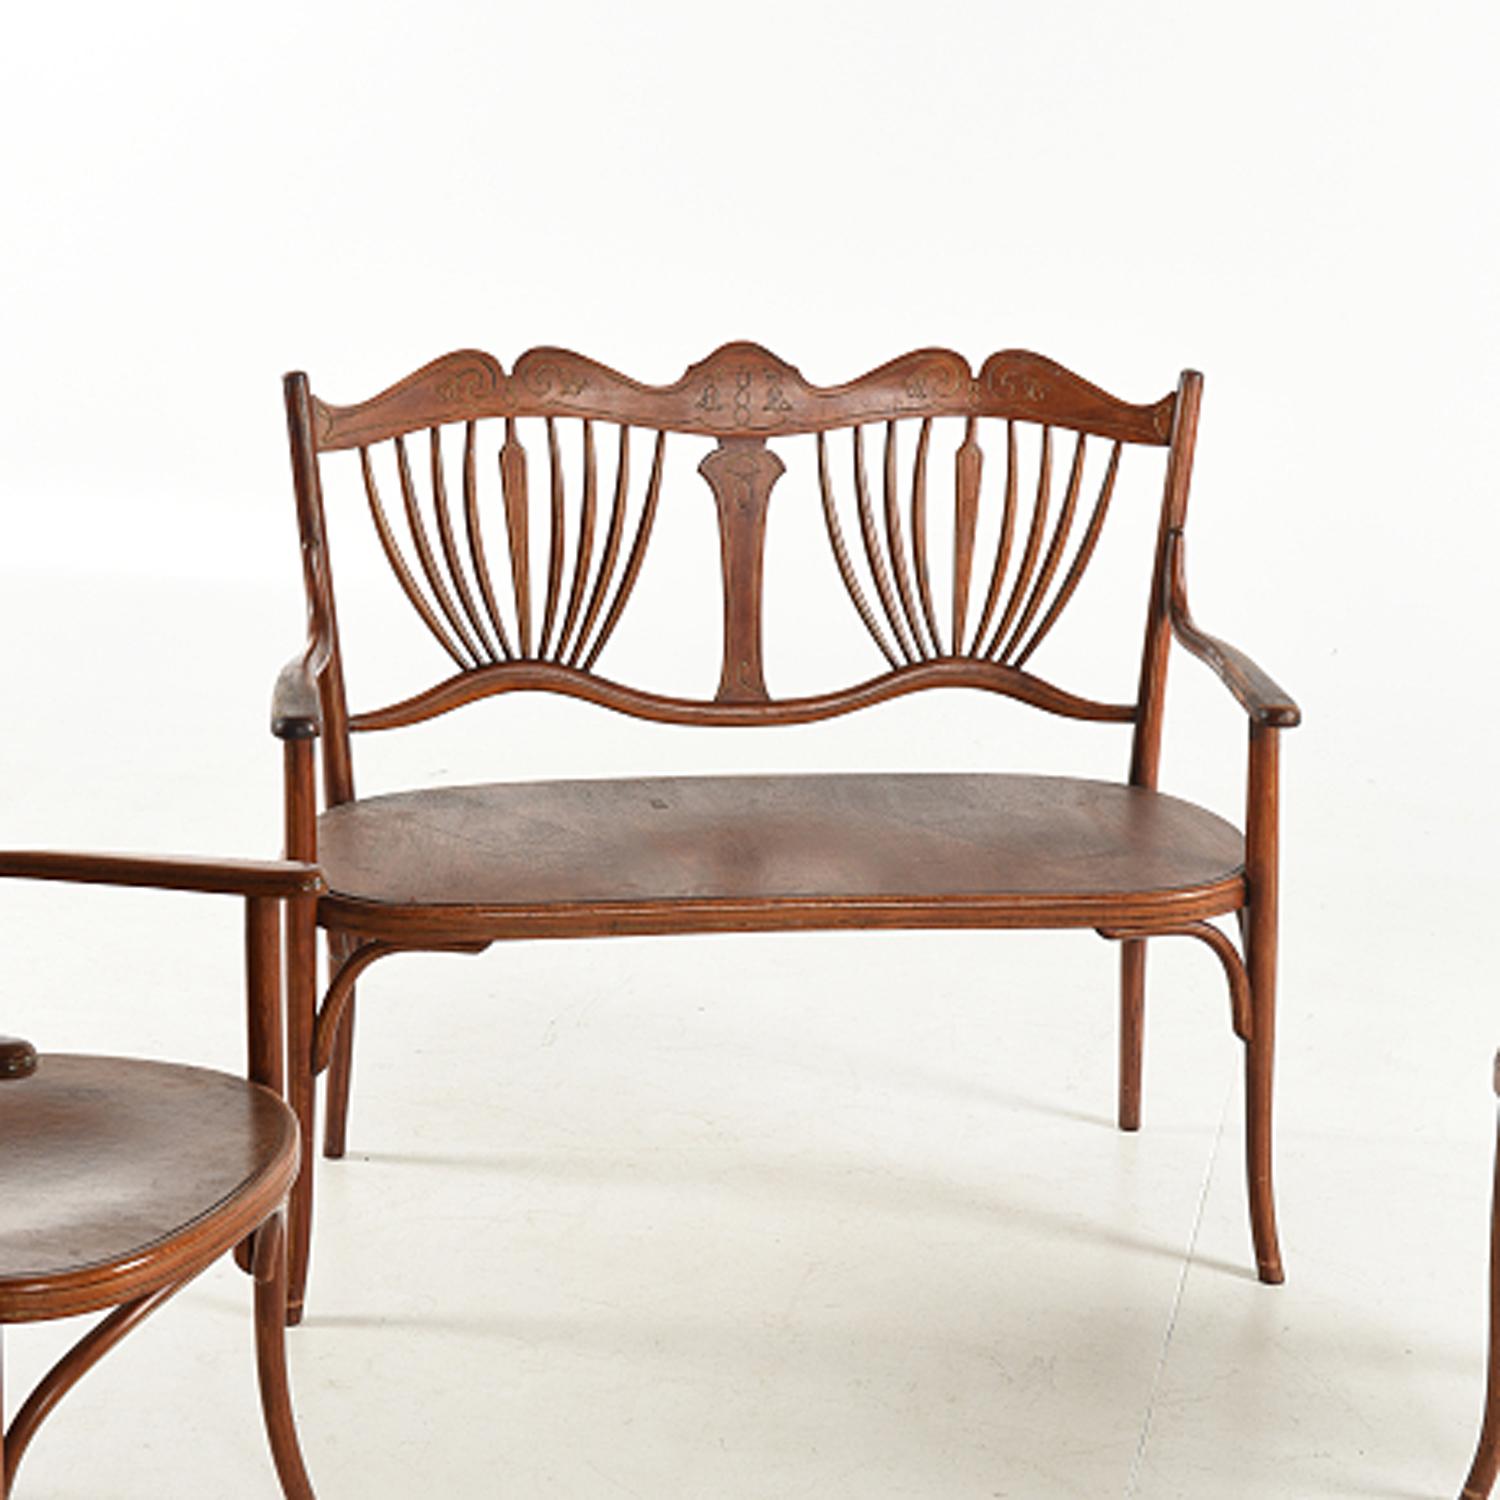 Art Nouveau fischel suite from about 1910 catalog number 150.
Bentwood set consisting of a table, settee, armchairs and one chair.
Dimensions on the last 2 pictures
Good original condition
Price for a complete set.